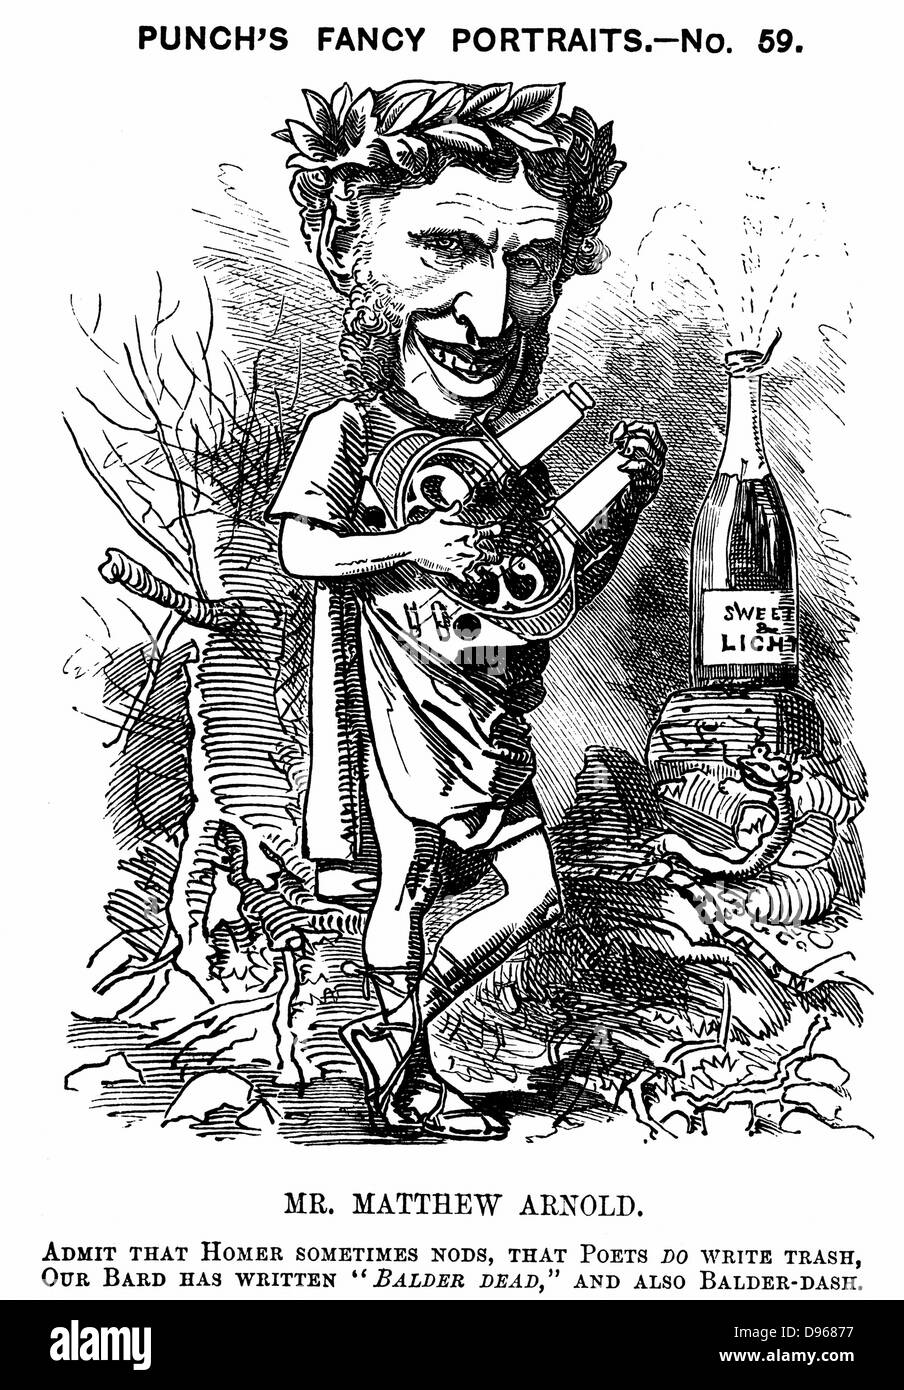 Matthew Arnold (1822-1888) British poet, critic and educationalist. Eldest son of Thomas Arnold, headmaster of Rugby School. Cartoon by Edward Linley Sambourne in the Fancy Portraits series from 'Punch' London 1881. Wood engraving Stock Photo